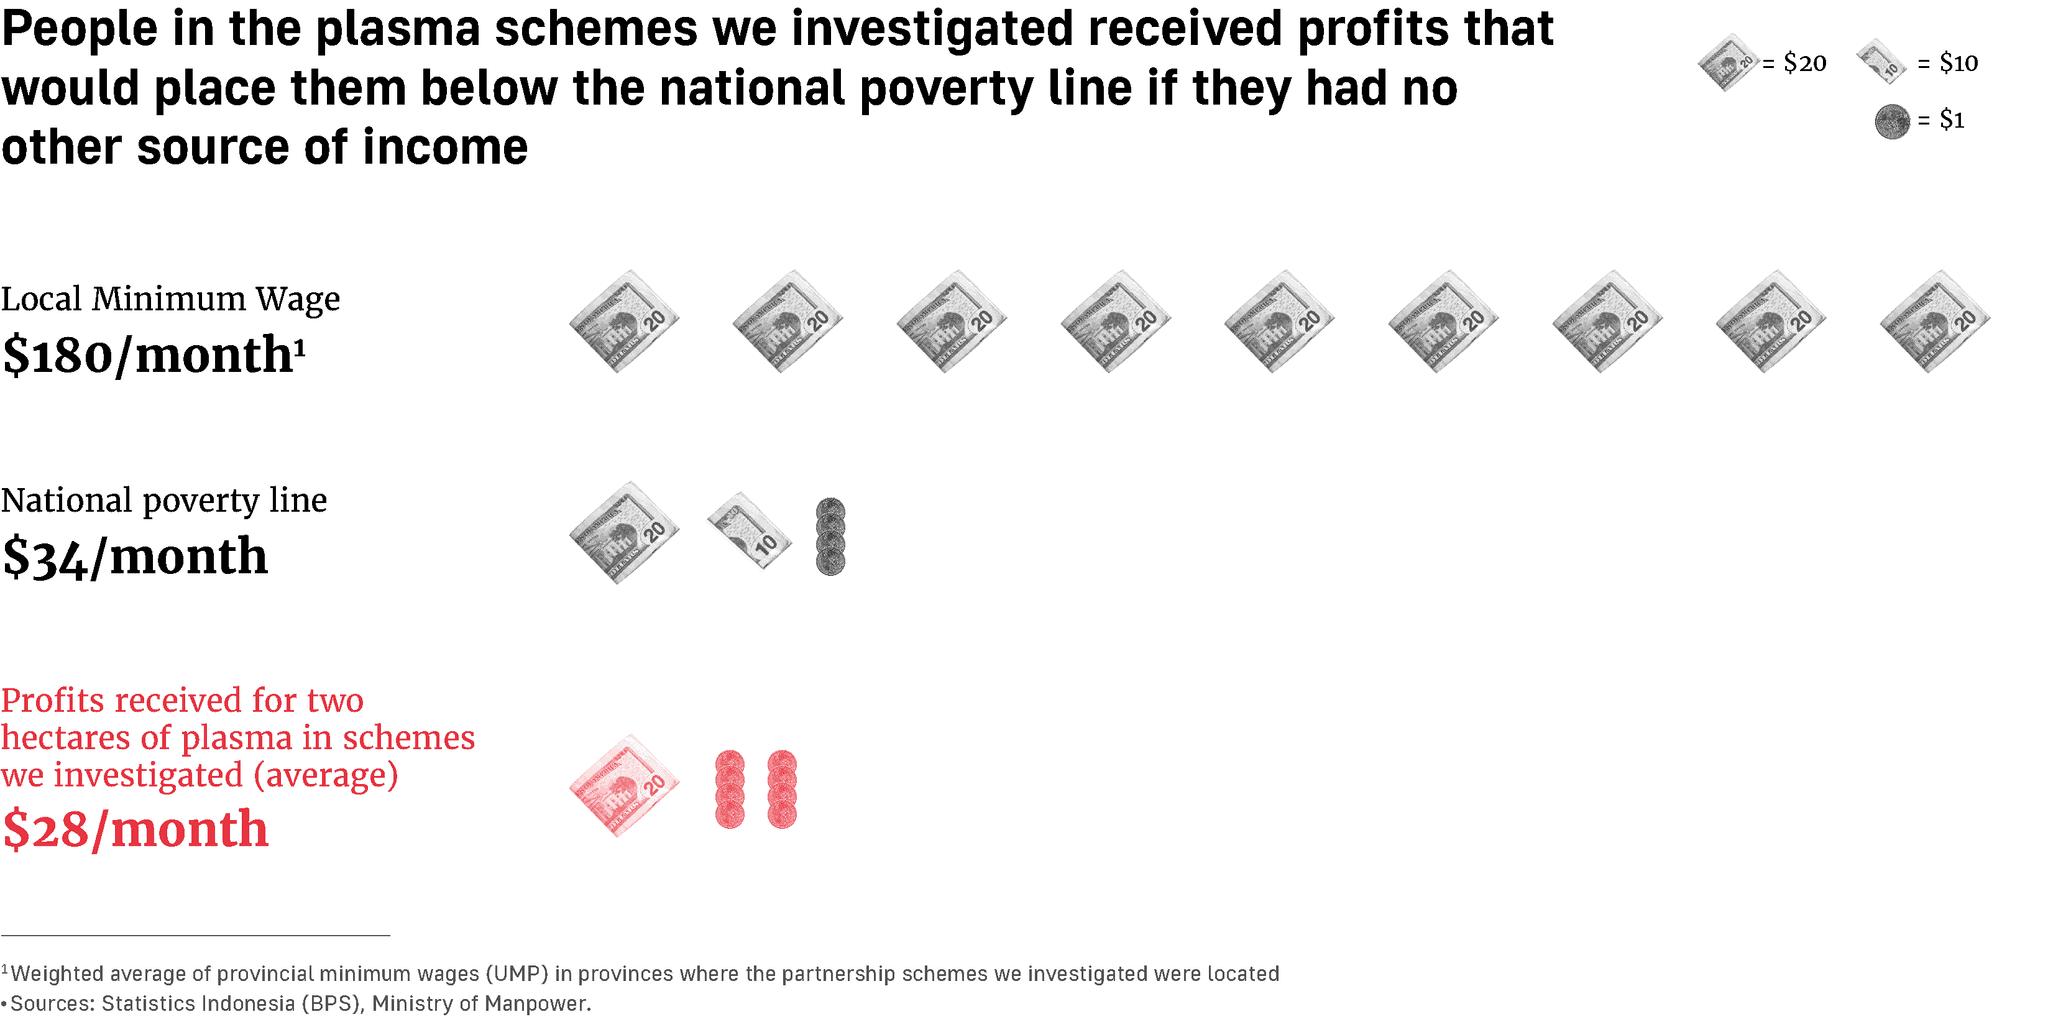 Graphic showing that communities in plasma schemes received a fraction of the profits plantations can generate